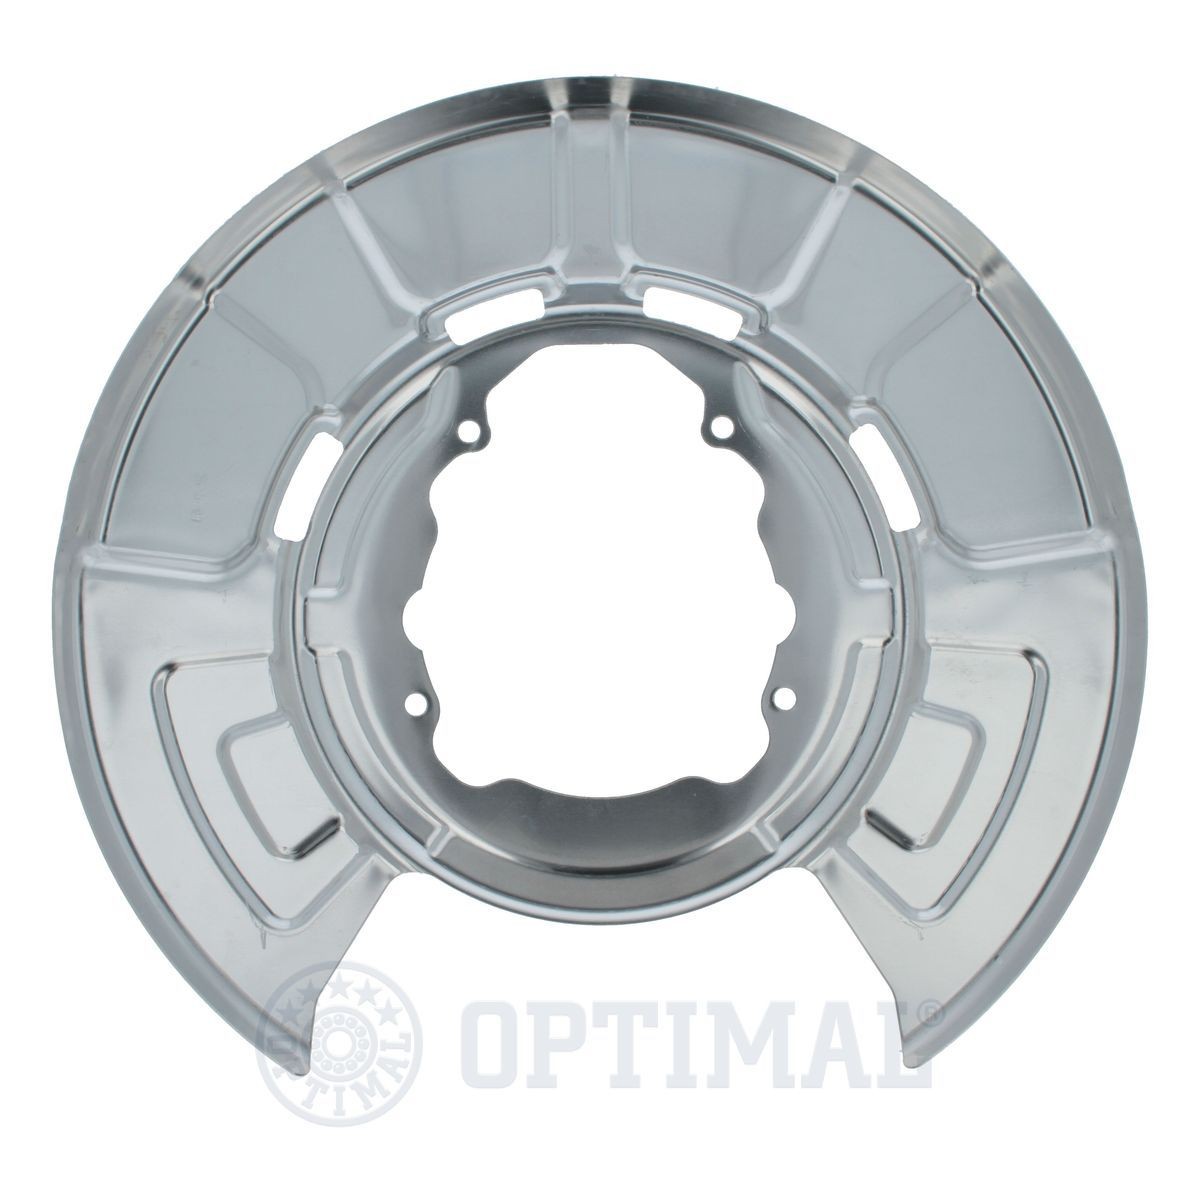 OPTIMAL Rear Brake Disc Cover Plate BSP-5033B for BMW X5, X6